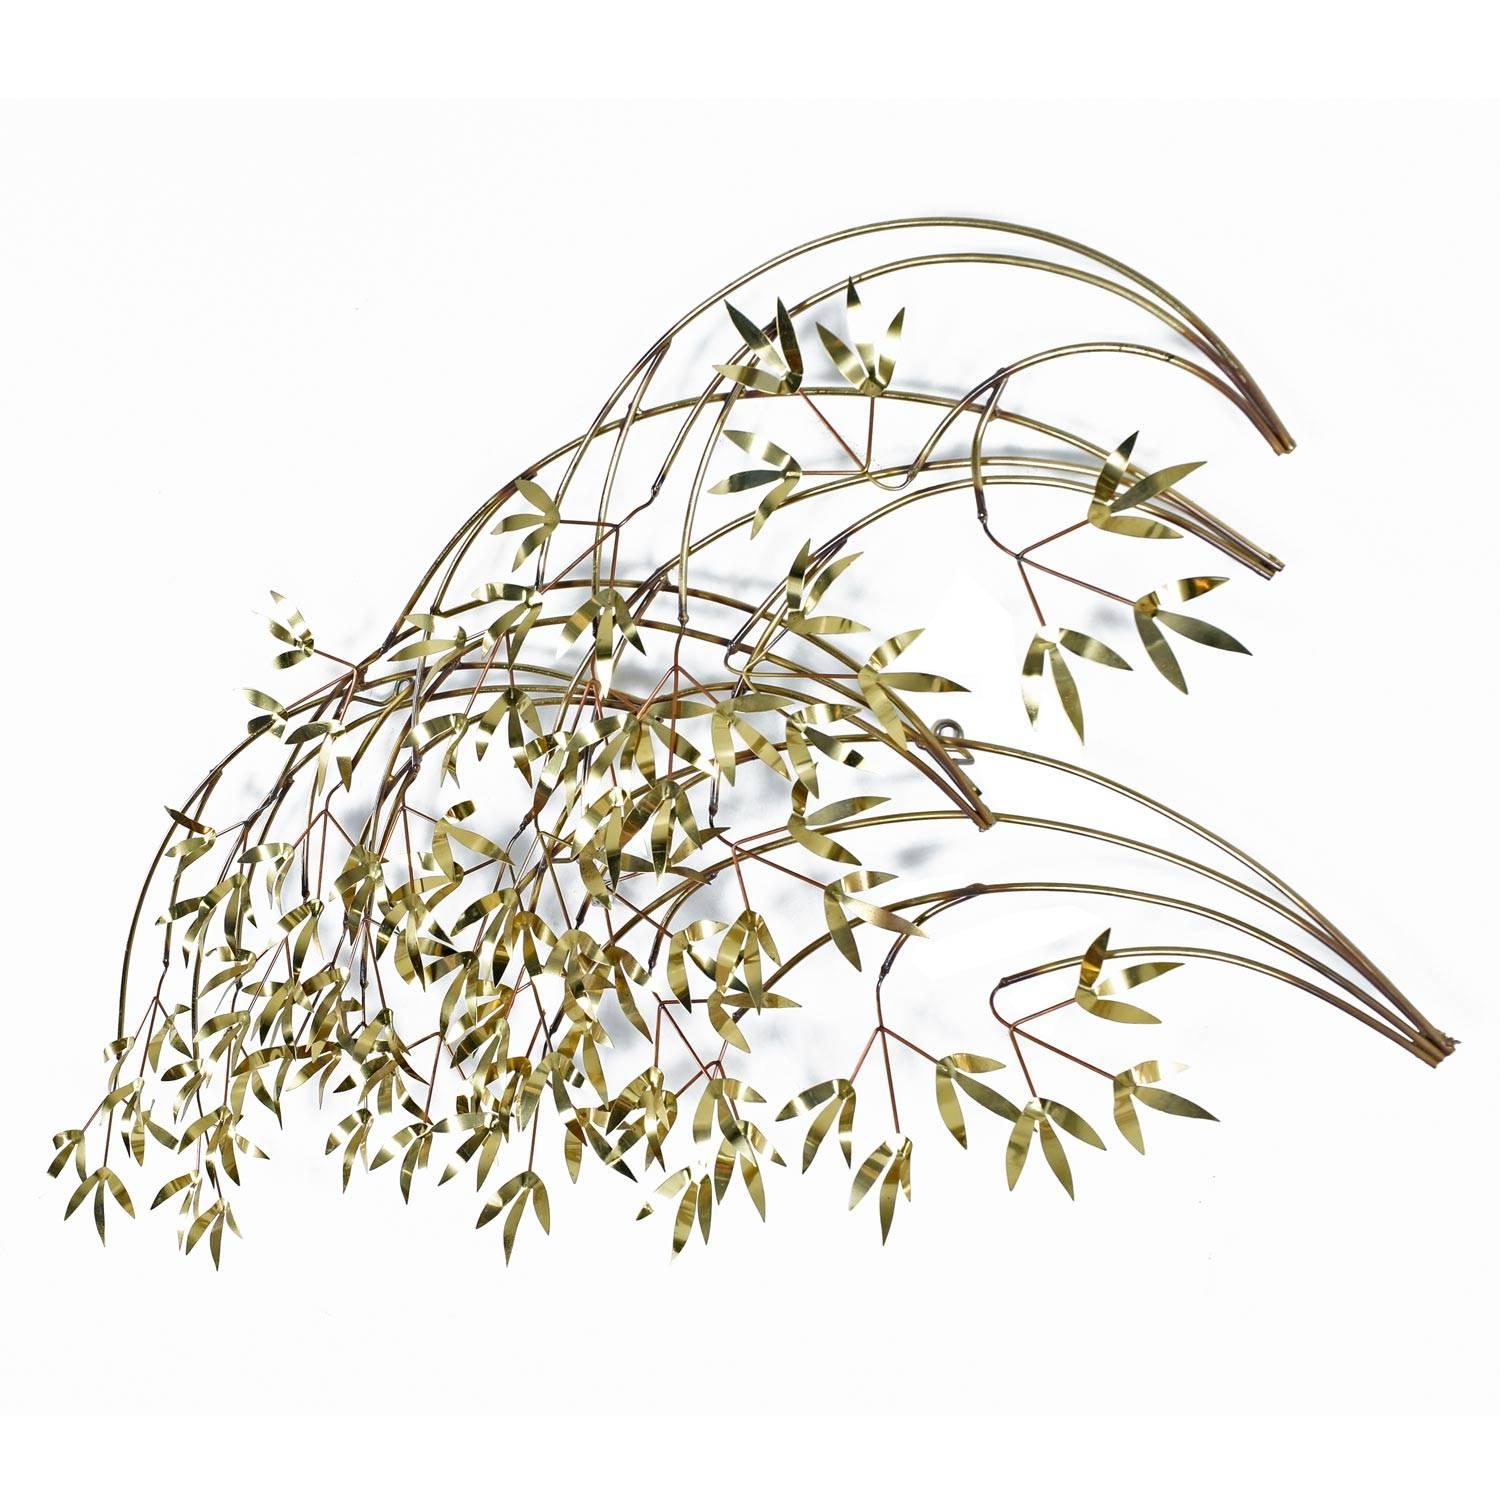 This Hollywood Regency brass sculpture by American designer Curtis Jere depicts slender bamboo chutes with delicate leaves. The photos simply do not do it justice. You will certainly fall in love with the graceful organic form and subtle patina